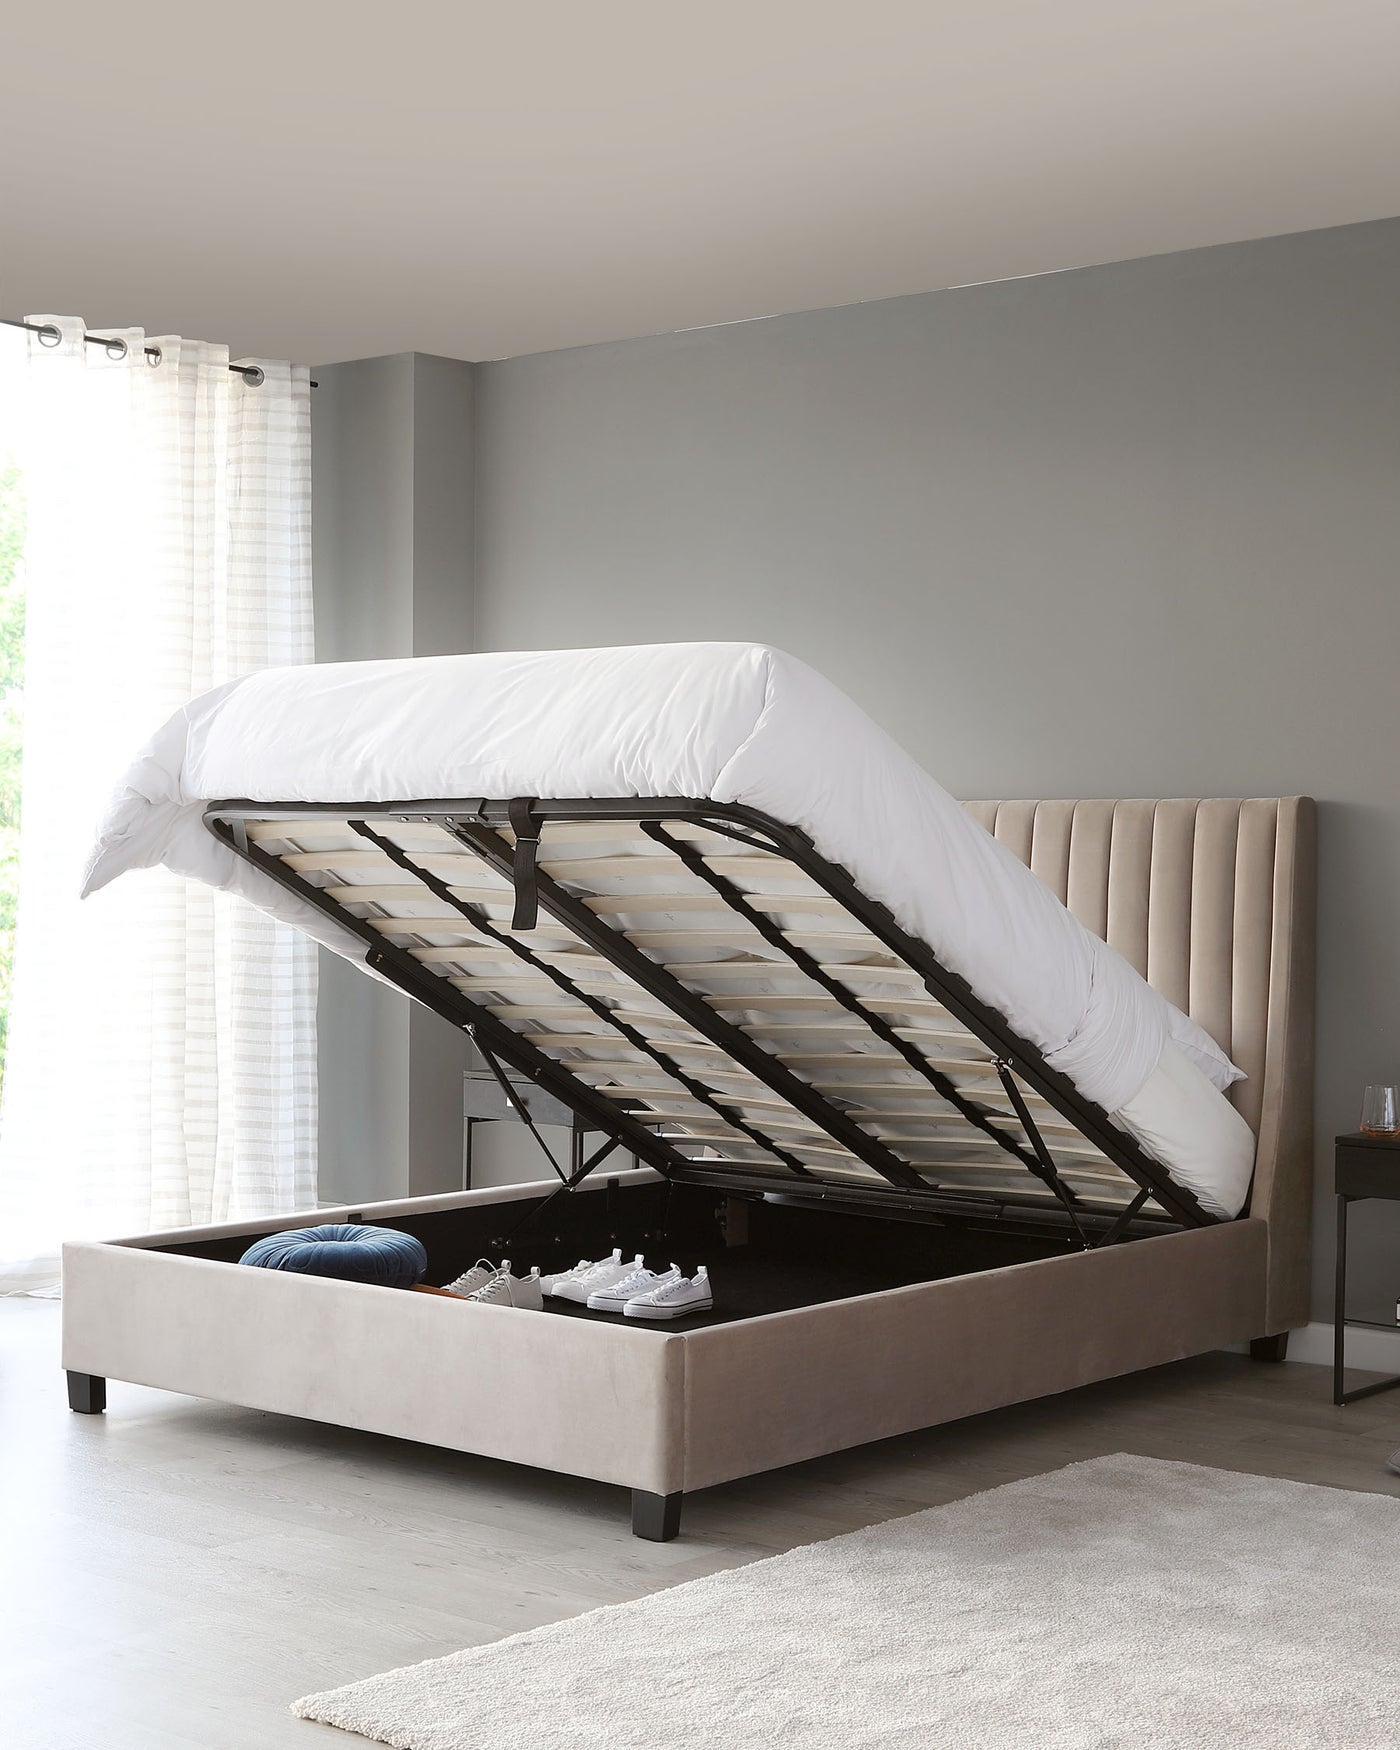 Contemporary beige upholstered storage bed with a tufted headboard design, featuring a gas-lift mechanism to access the under-bed storage compartment.